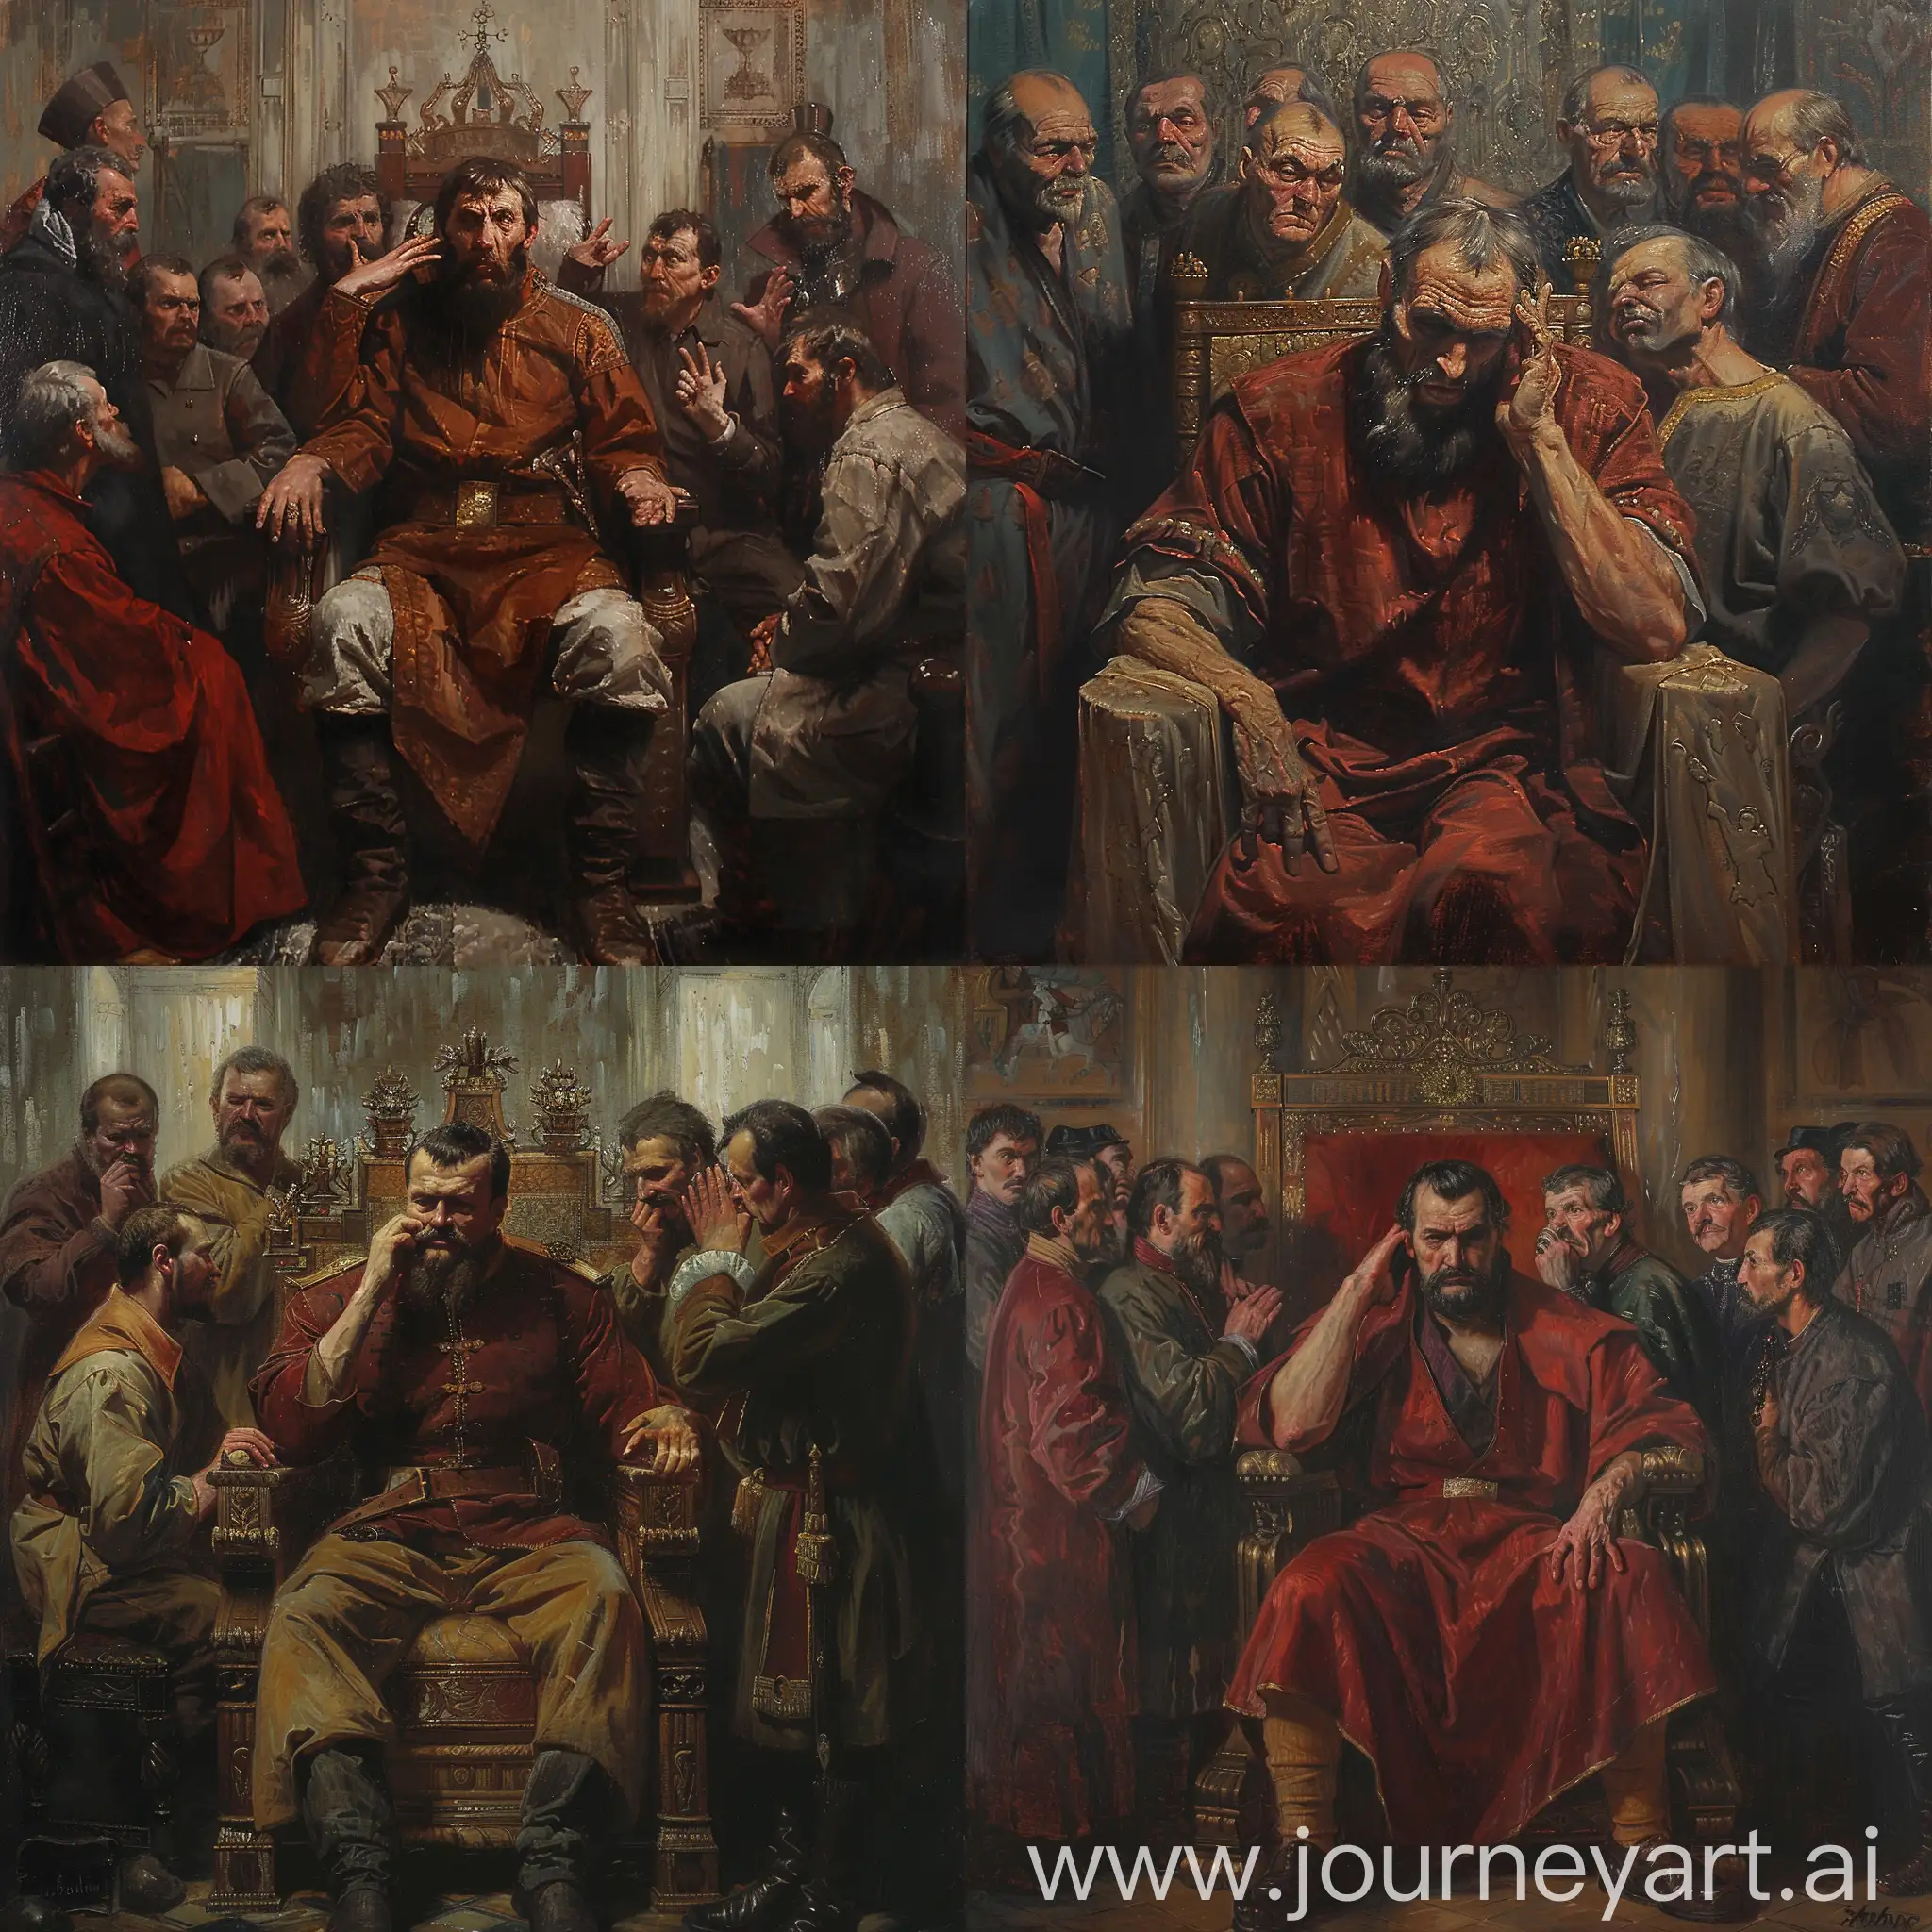 Ivan-the-Terrible-Tyrannical-Ruler-on-Throne-with-Whispering-Advisors-Oil-Painting